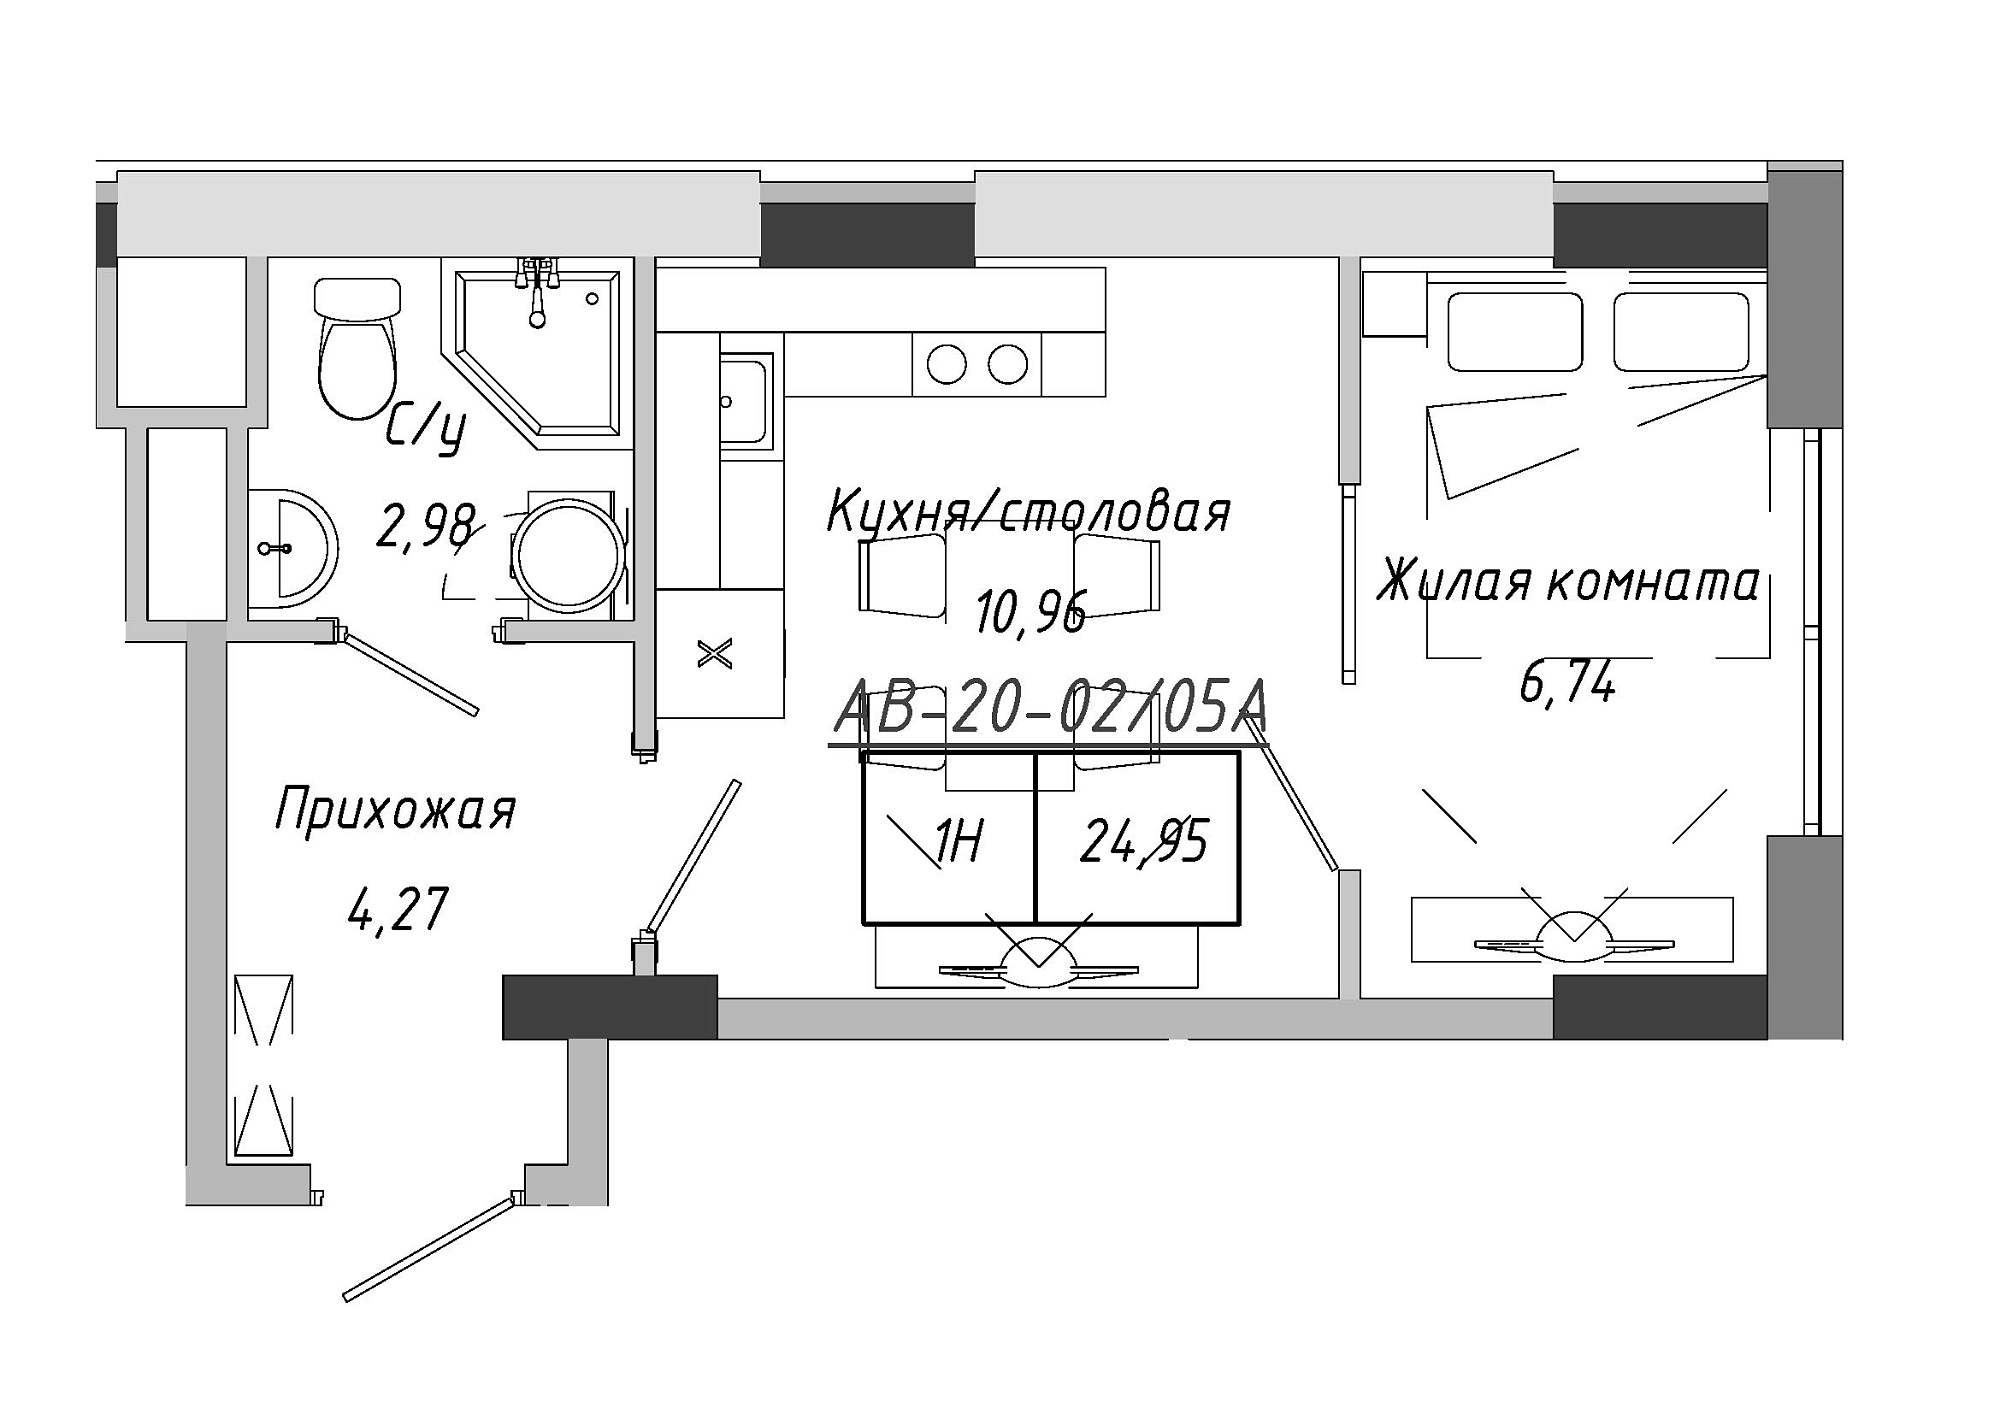 Planning 1-rm flats area 24.95m2, AB-20-02/0005а.